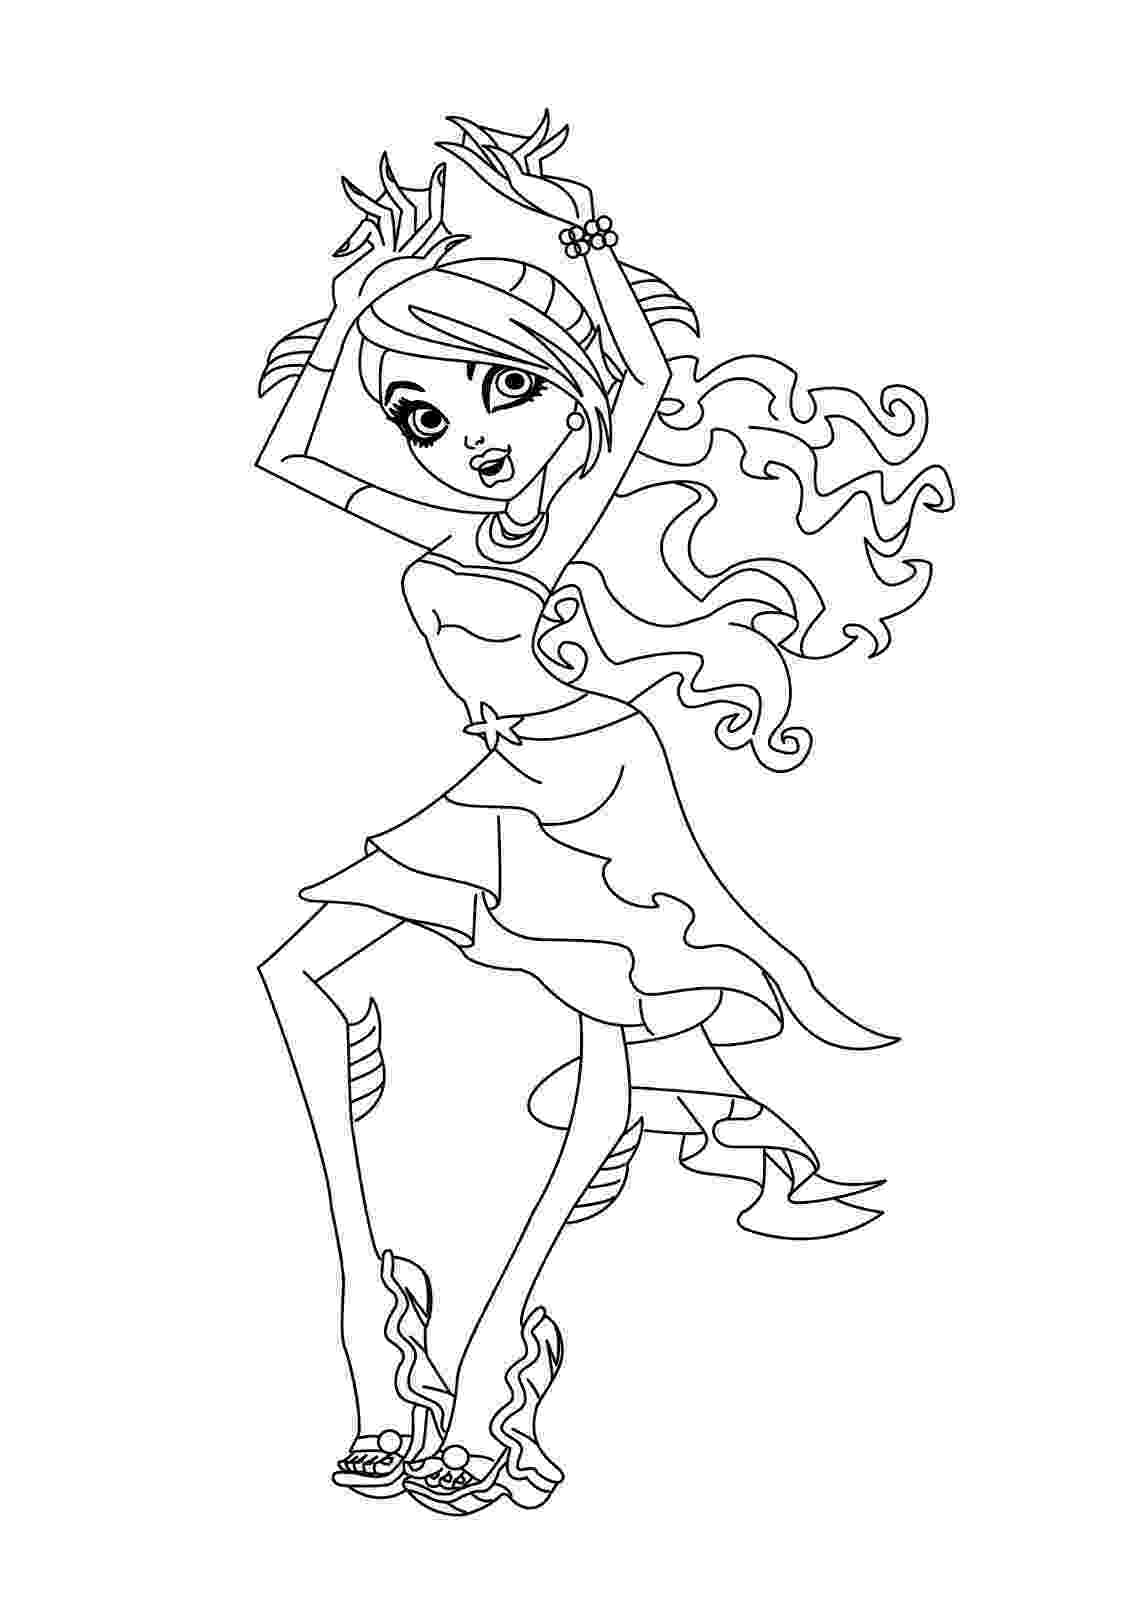 free coloring pages monster high coloring pages monster high coloring pages free and printable high pages free coloring monster 